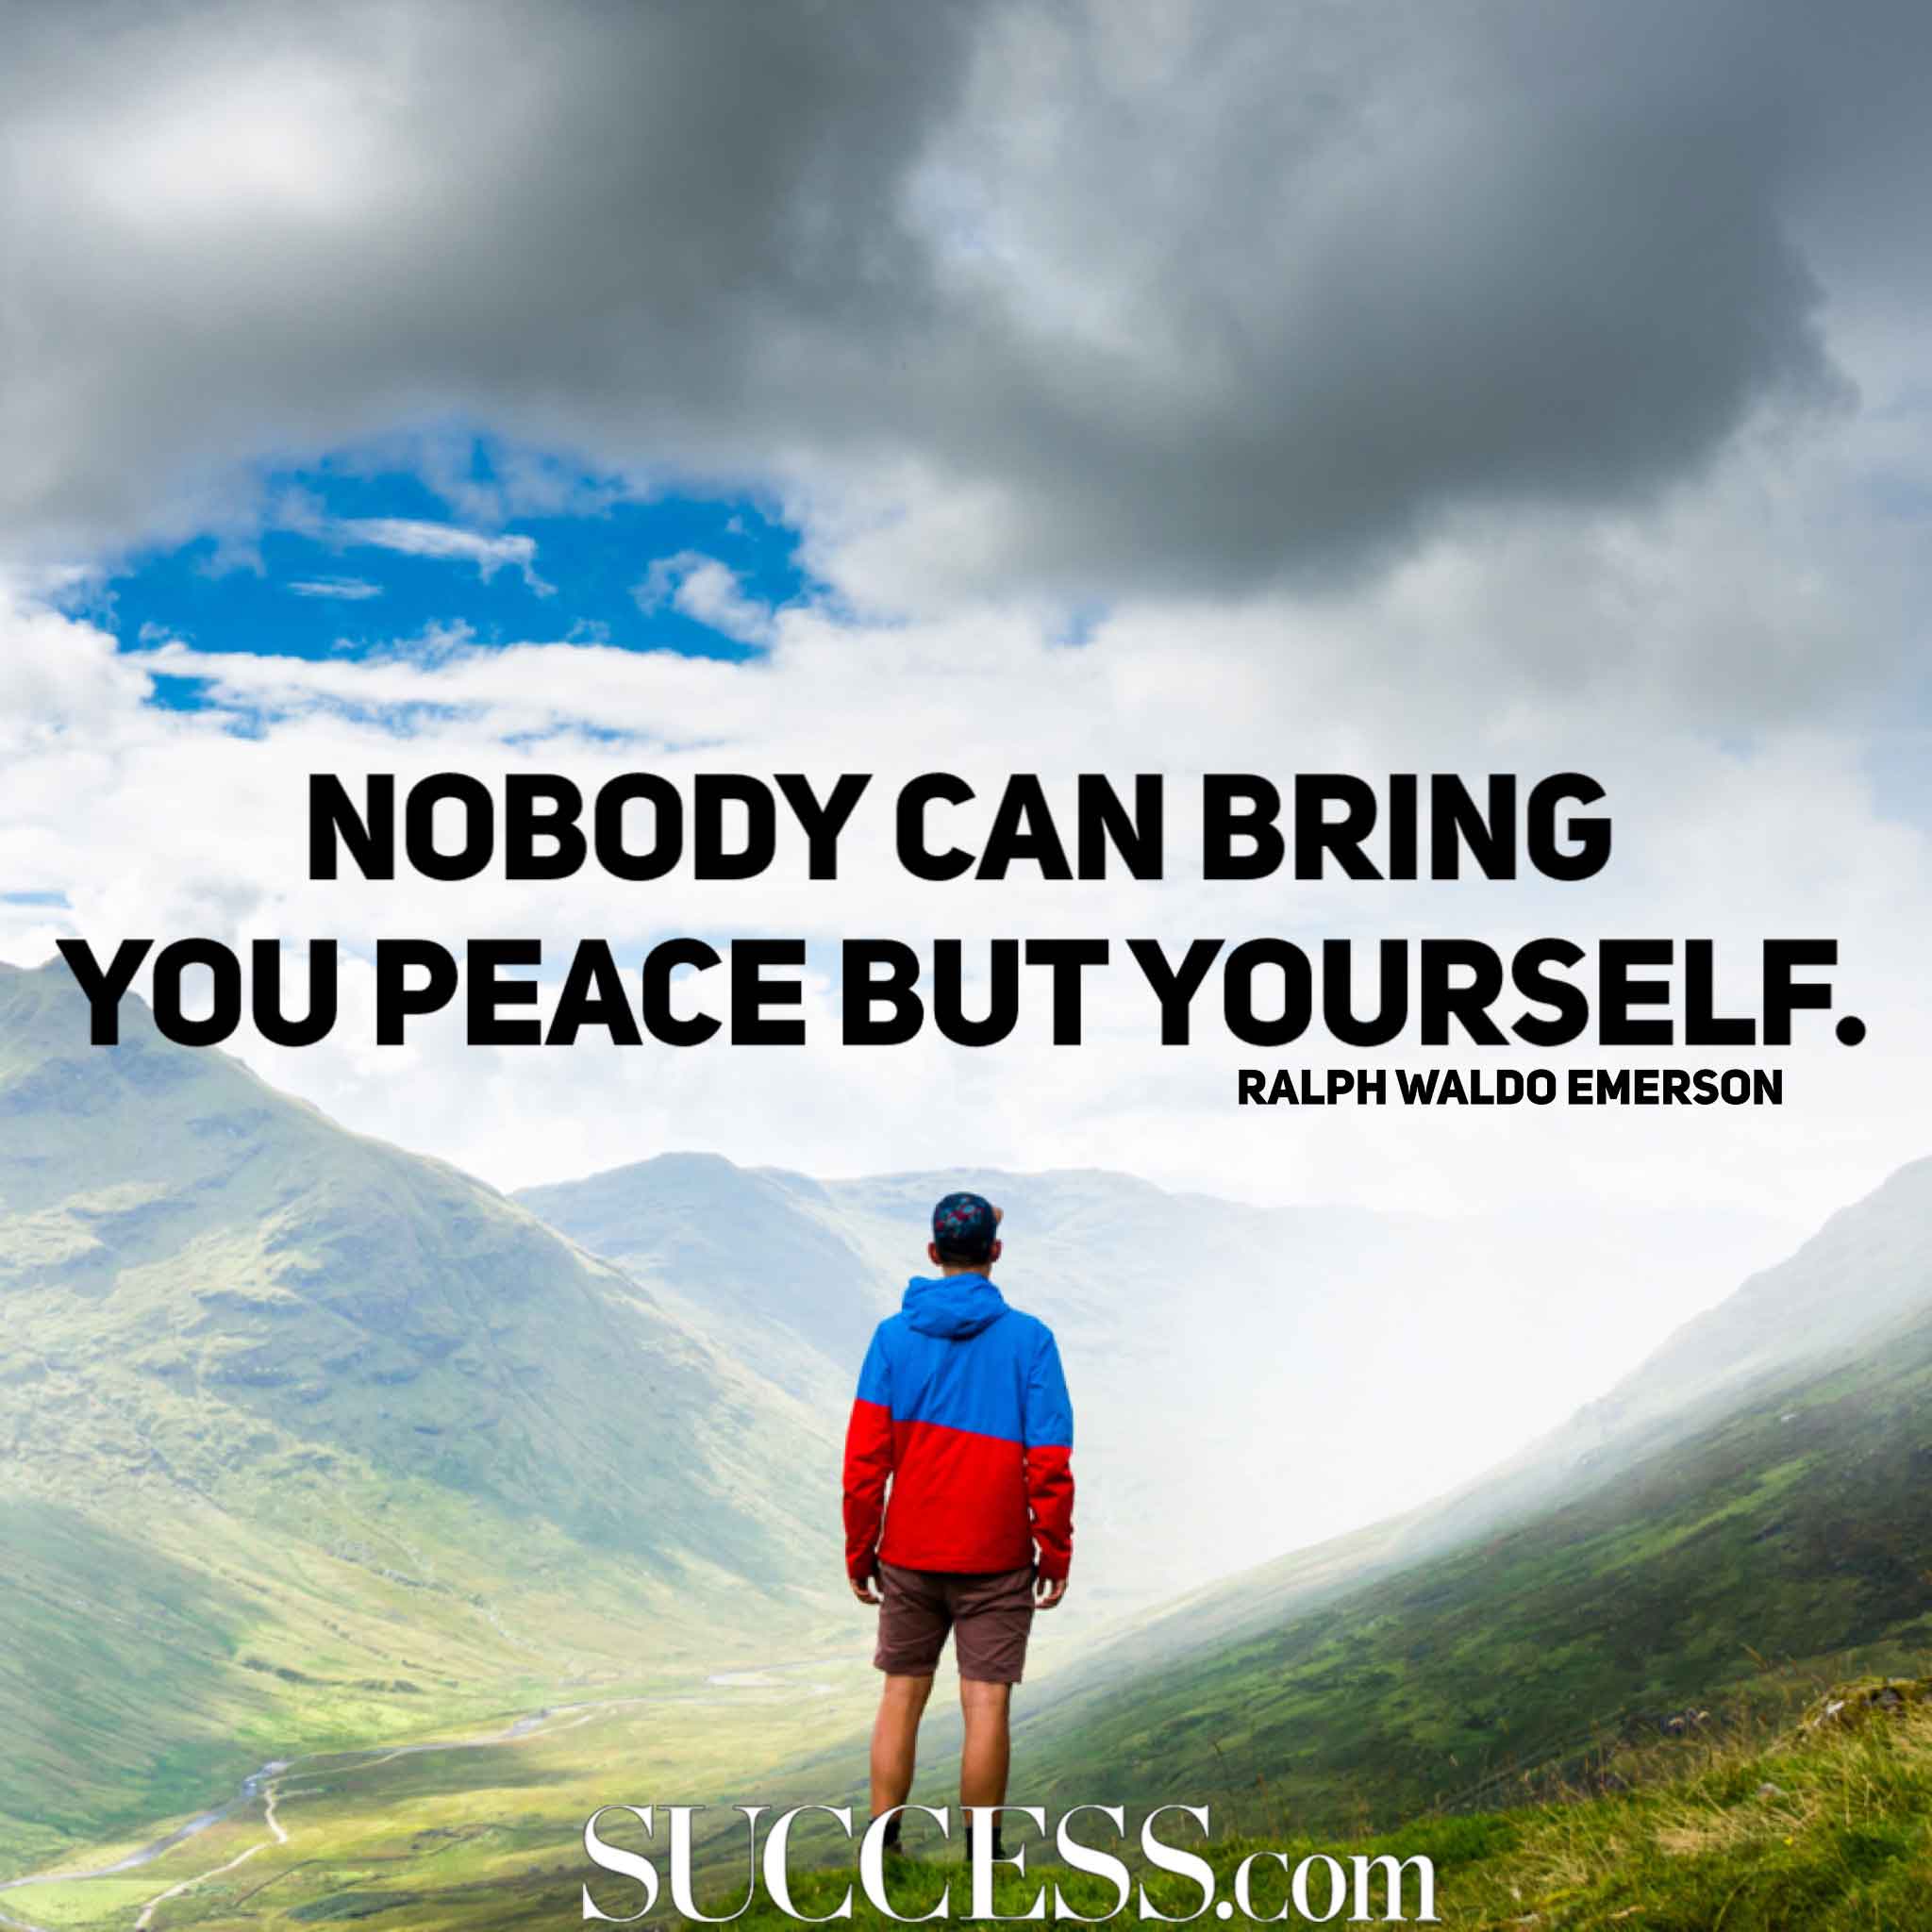 17 Quotes About Finding Inner Peace